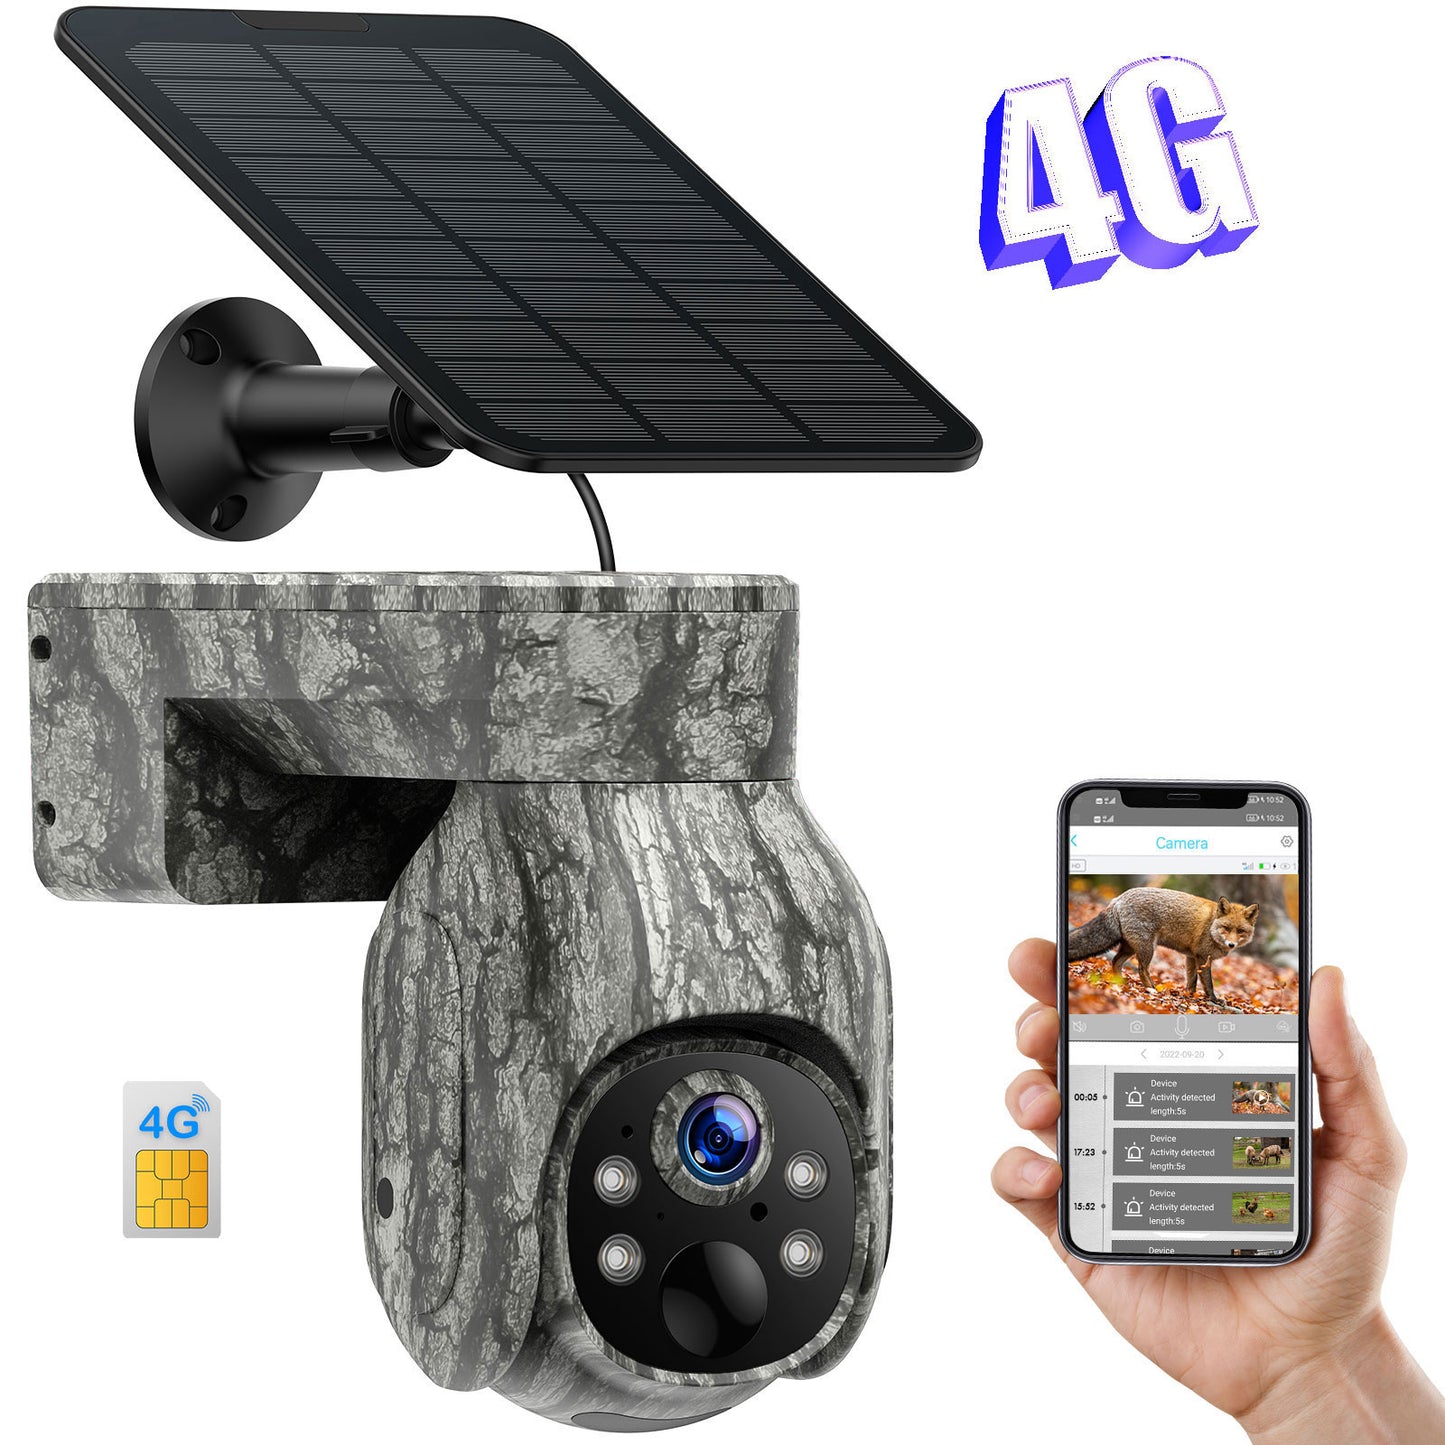 CAMPARK 4G LTE Cellular Trail Camera Wireless, Solar Powered Game Camera with 360°Pan 90°Tilt, 2K HD Night Vision, Motion Activated, Waterproof IP66, Hunting Security Camera with SIM Card, NO WiFi